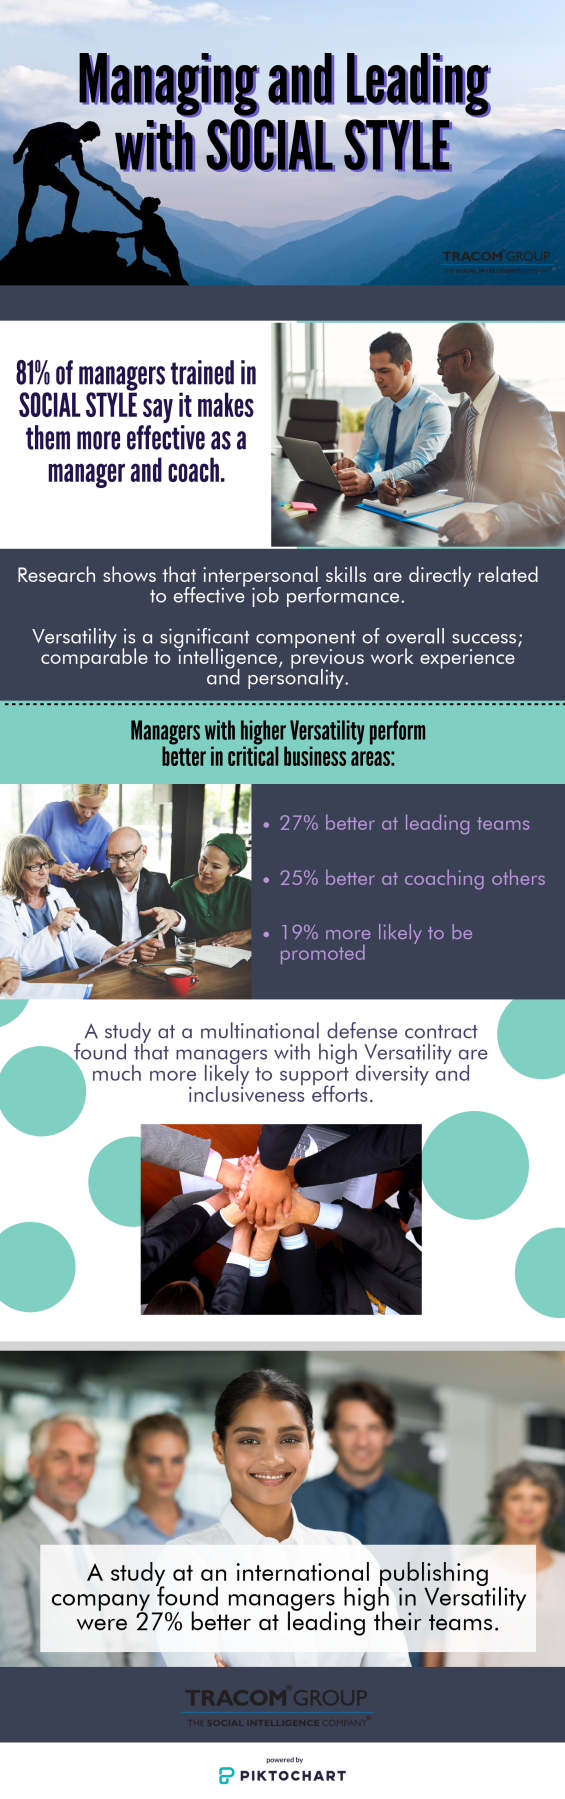 Managing and Leading with SOCIAL STYLE Infographic